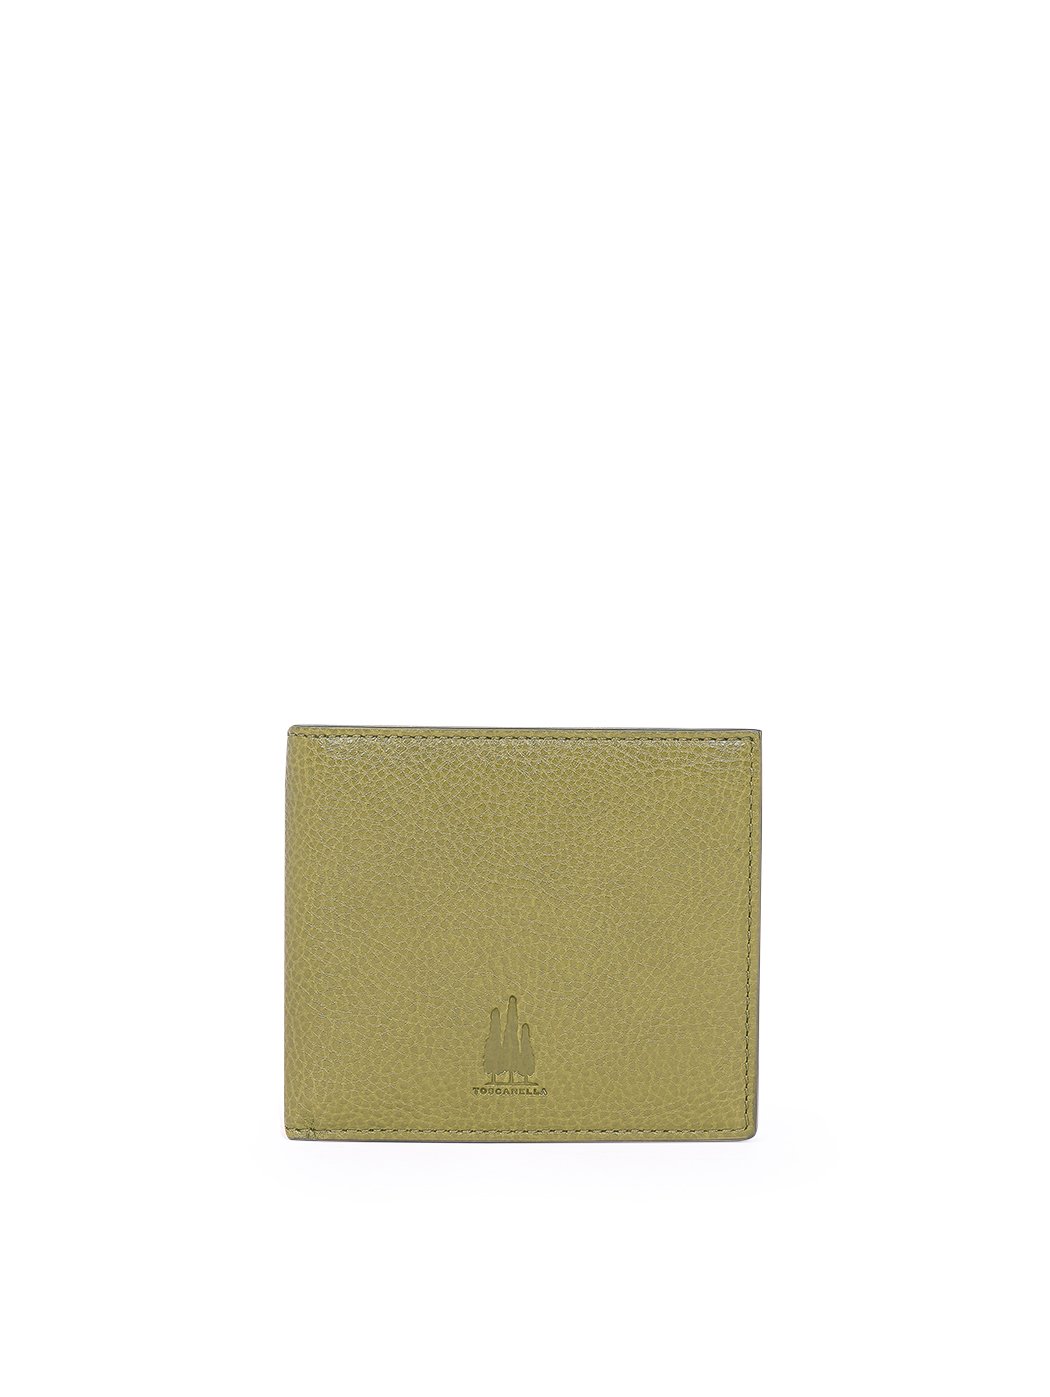 Billfold Wallet in Leather  Olive green